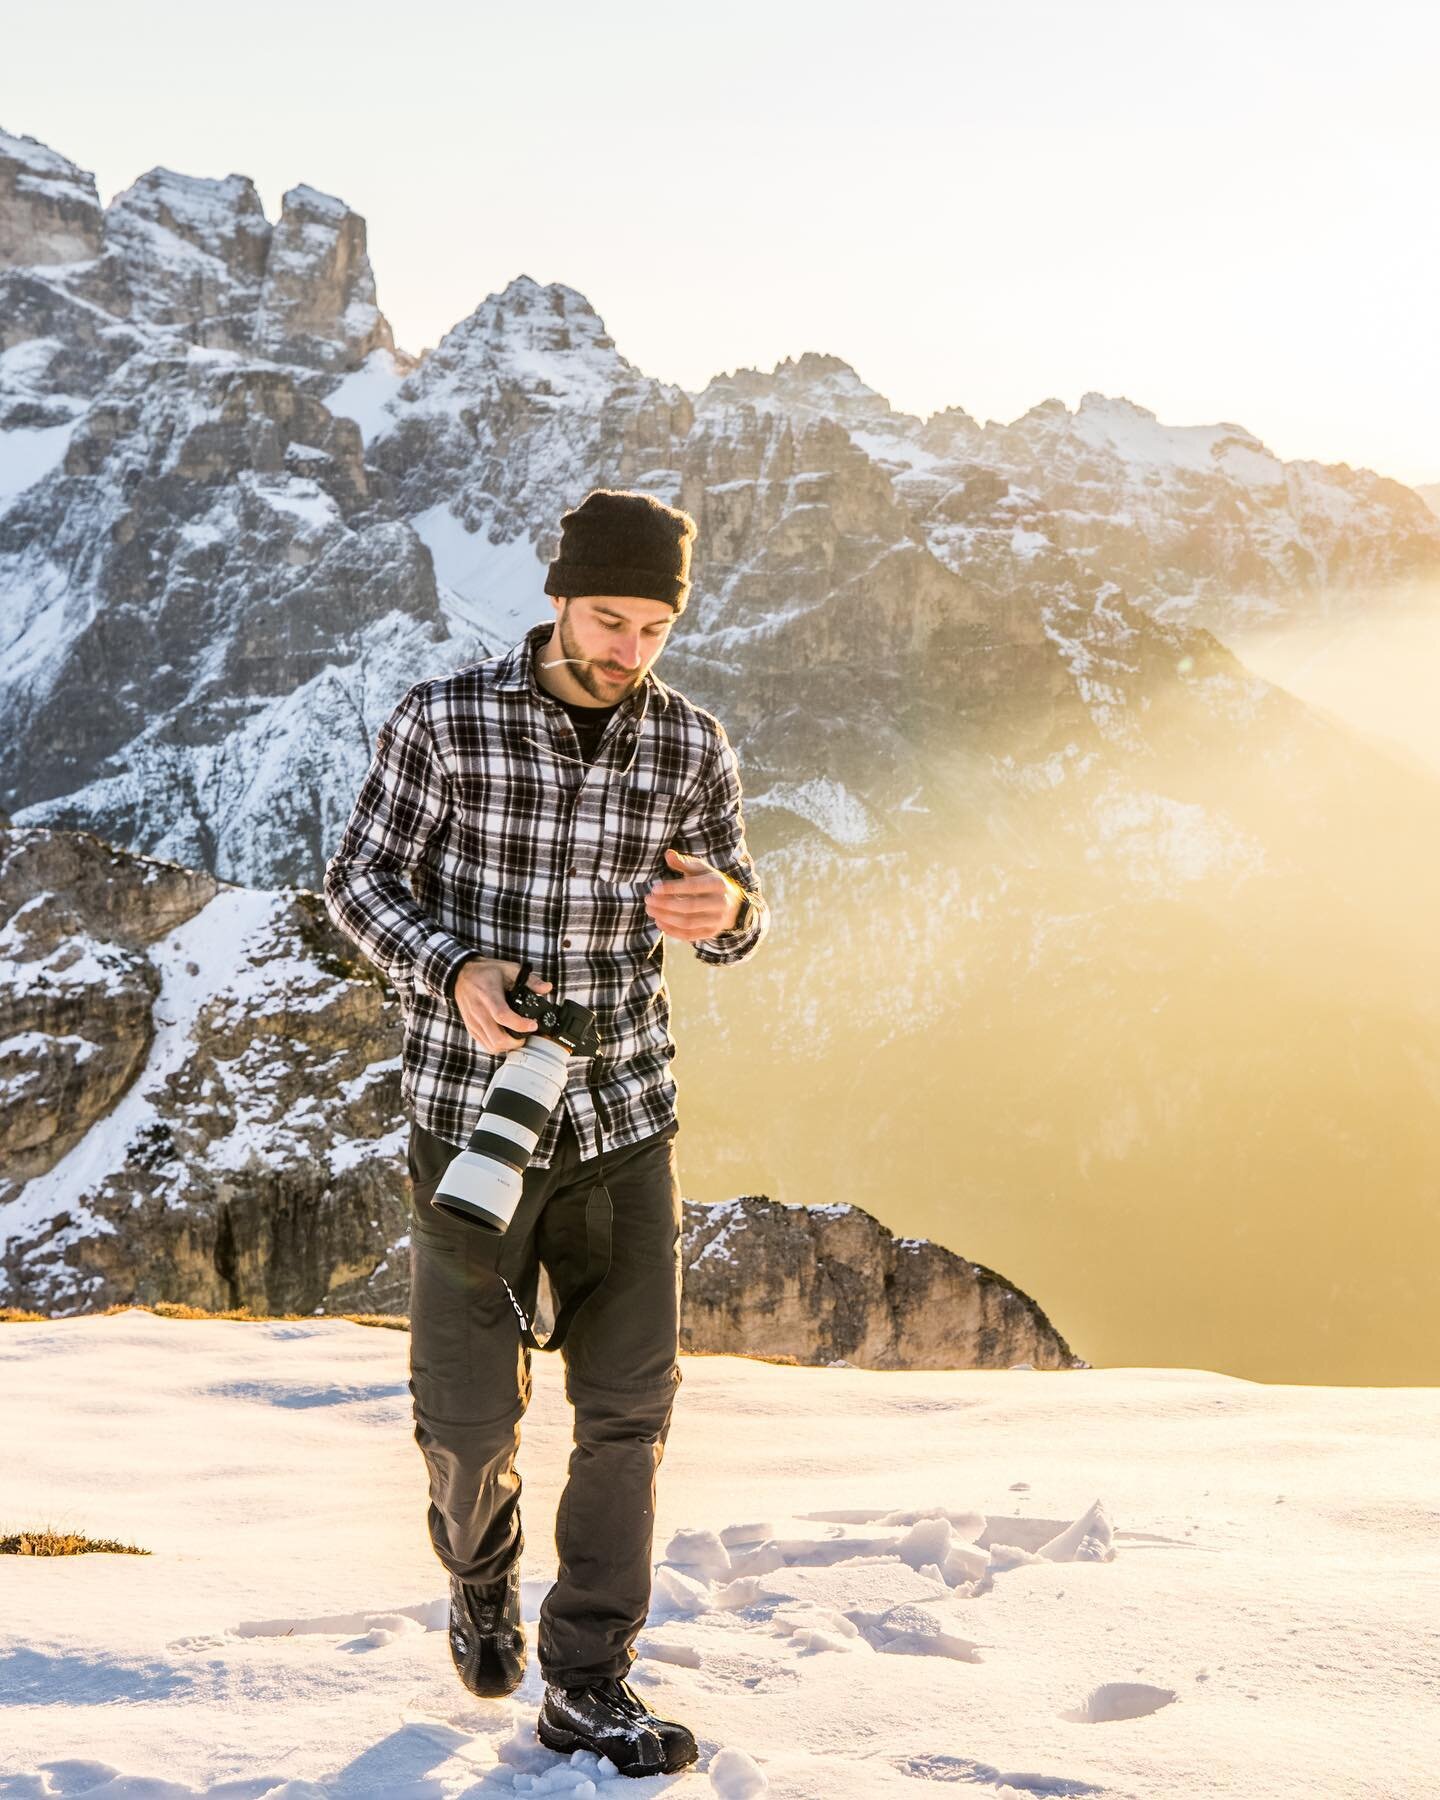 Looking forward to the next &bdquo;Golden morning&ldquo; 😍
Check out the behind the scenes from @db.fotos and the result of the shot! 
📷: @mathias_josi_photography (1. Pic) @db.fotos (behind-the-scenes-shot and edit of 2-4)
.
.
. 
#dolomites #dolom